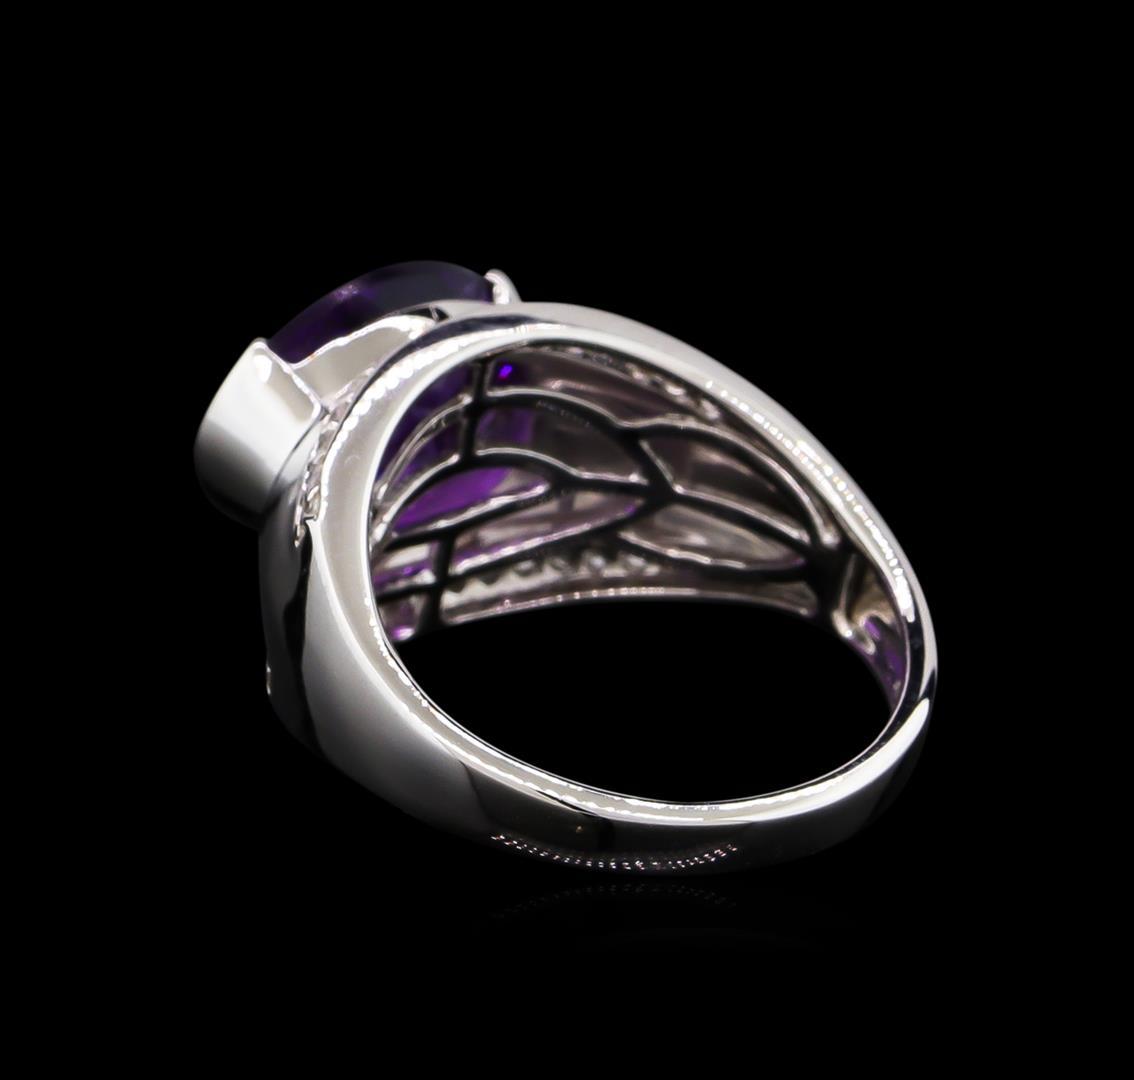 Crayola 3.95 ctw Amethyst and White Sapphire Ring - .925 Silver